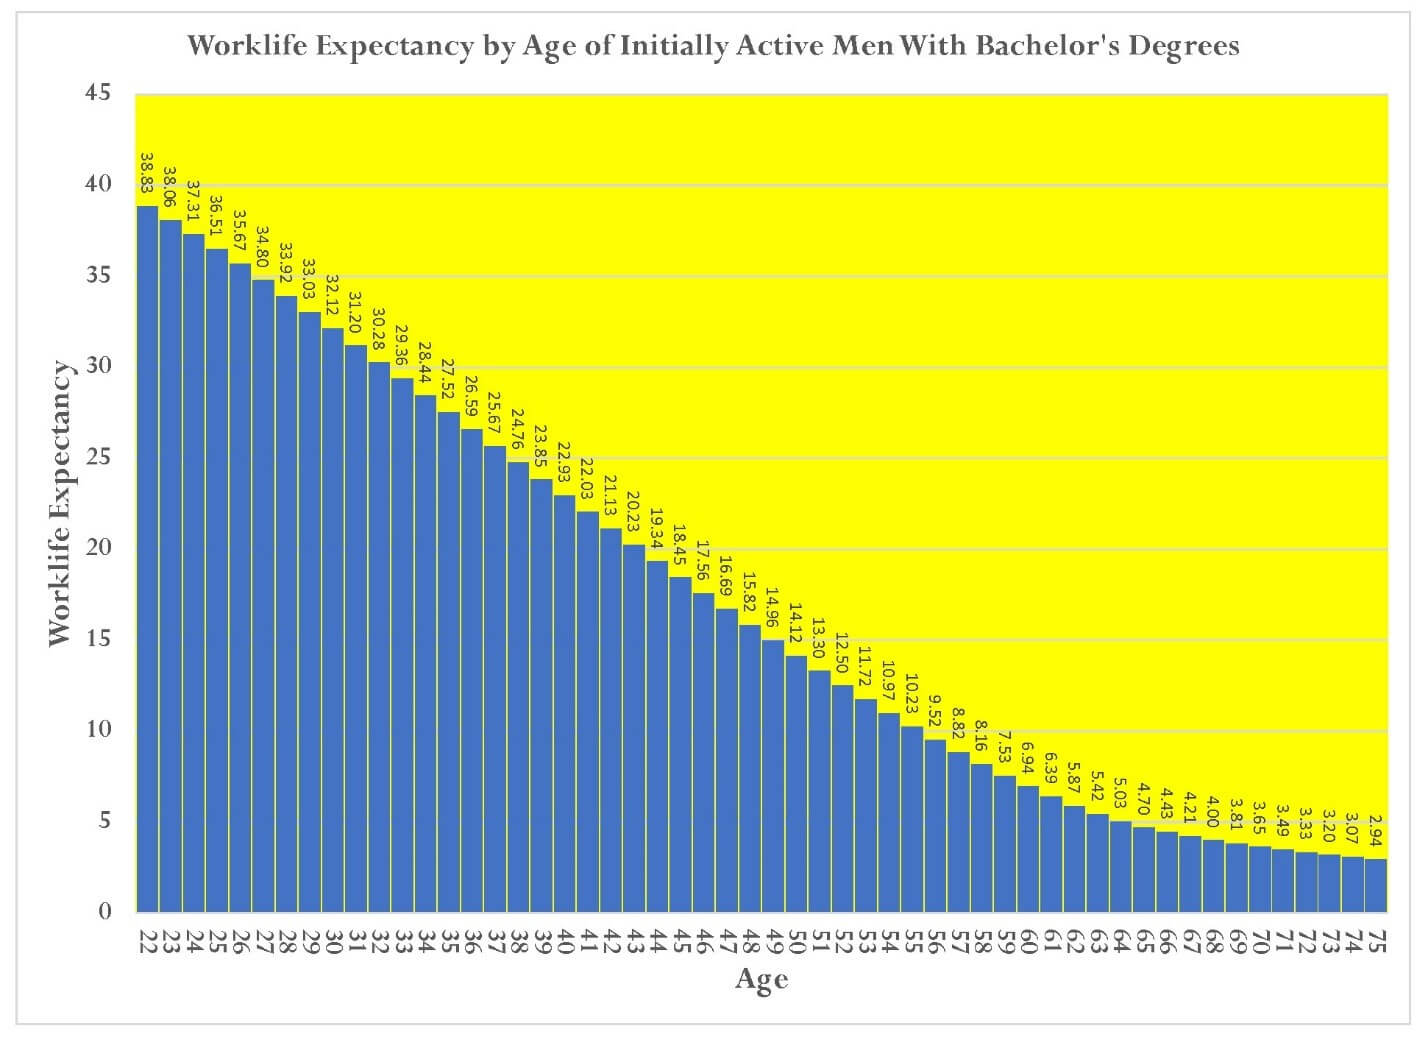 Graph of Worklife Expectancy by Age of Initially Active Men with Bachelor's Degrees